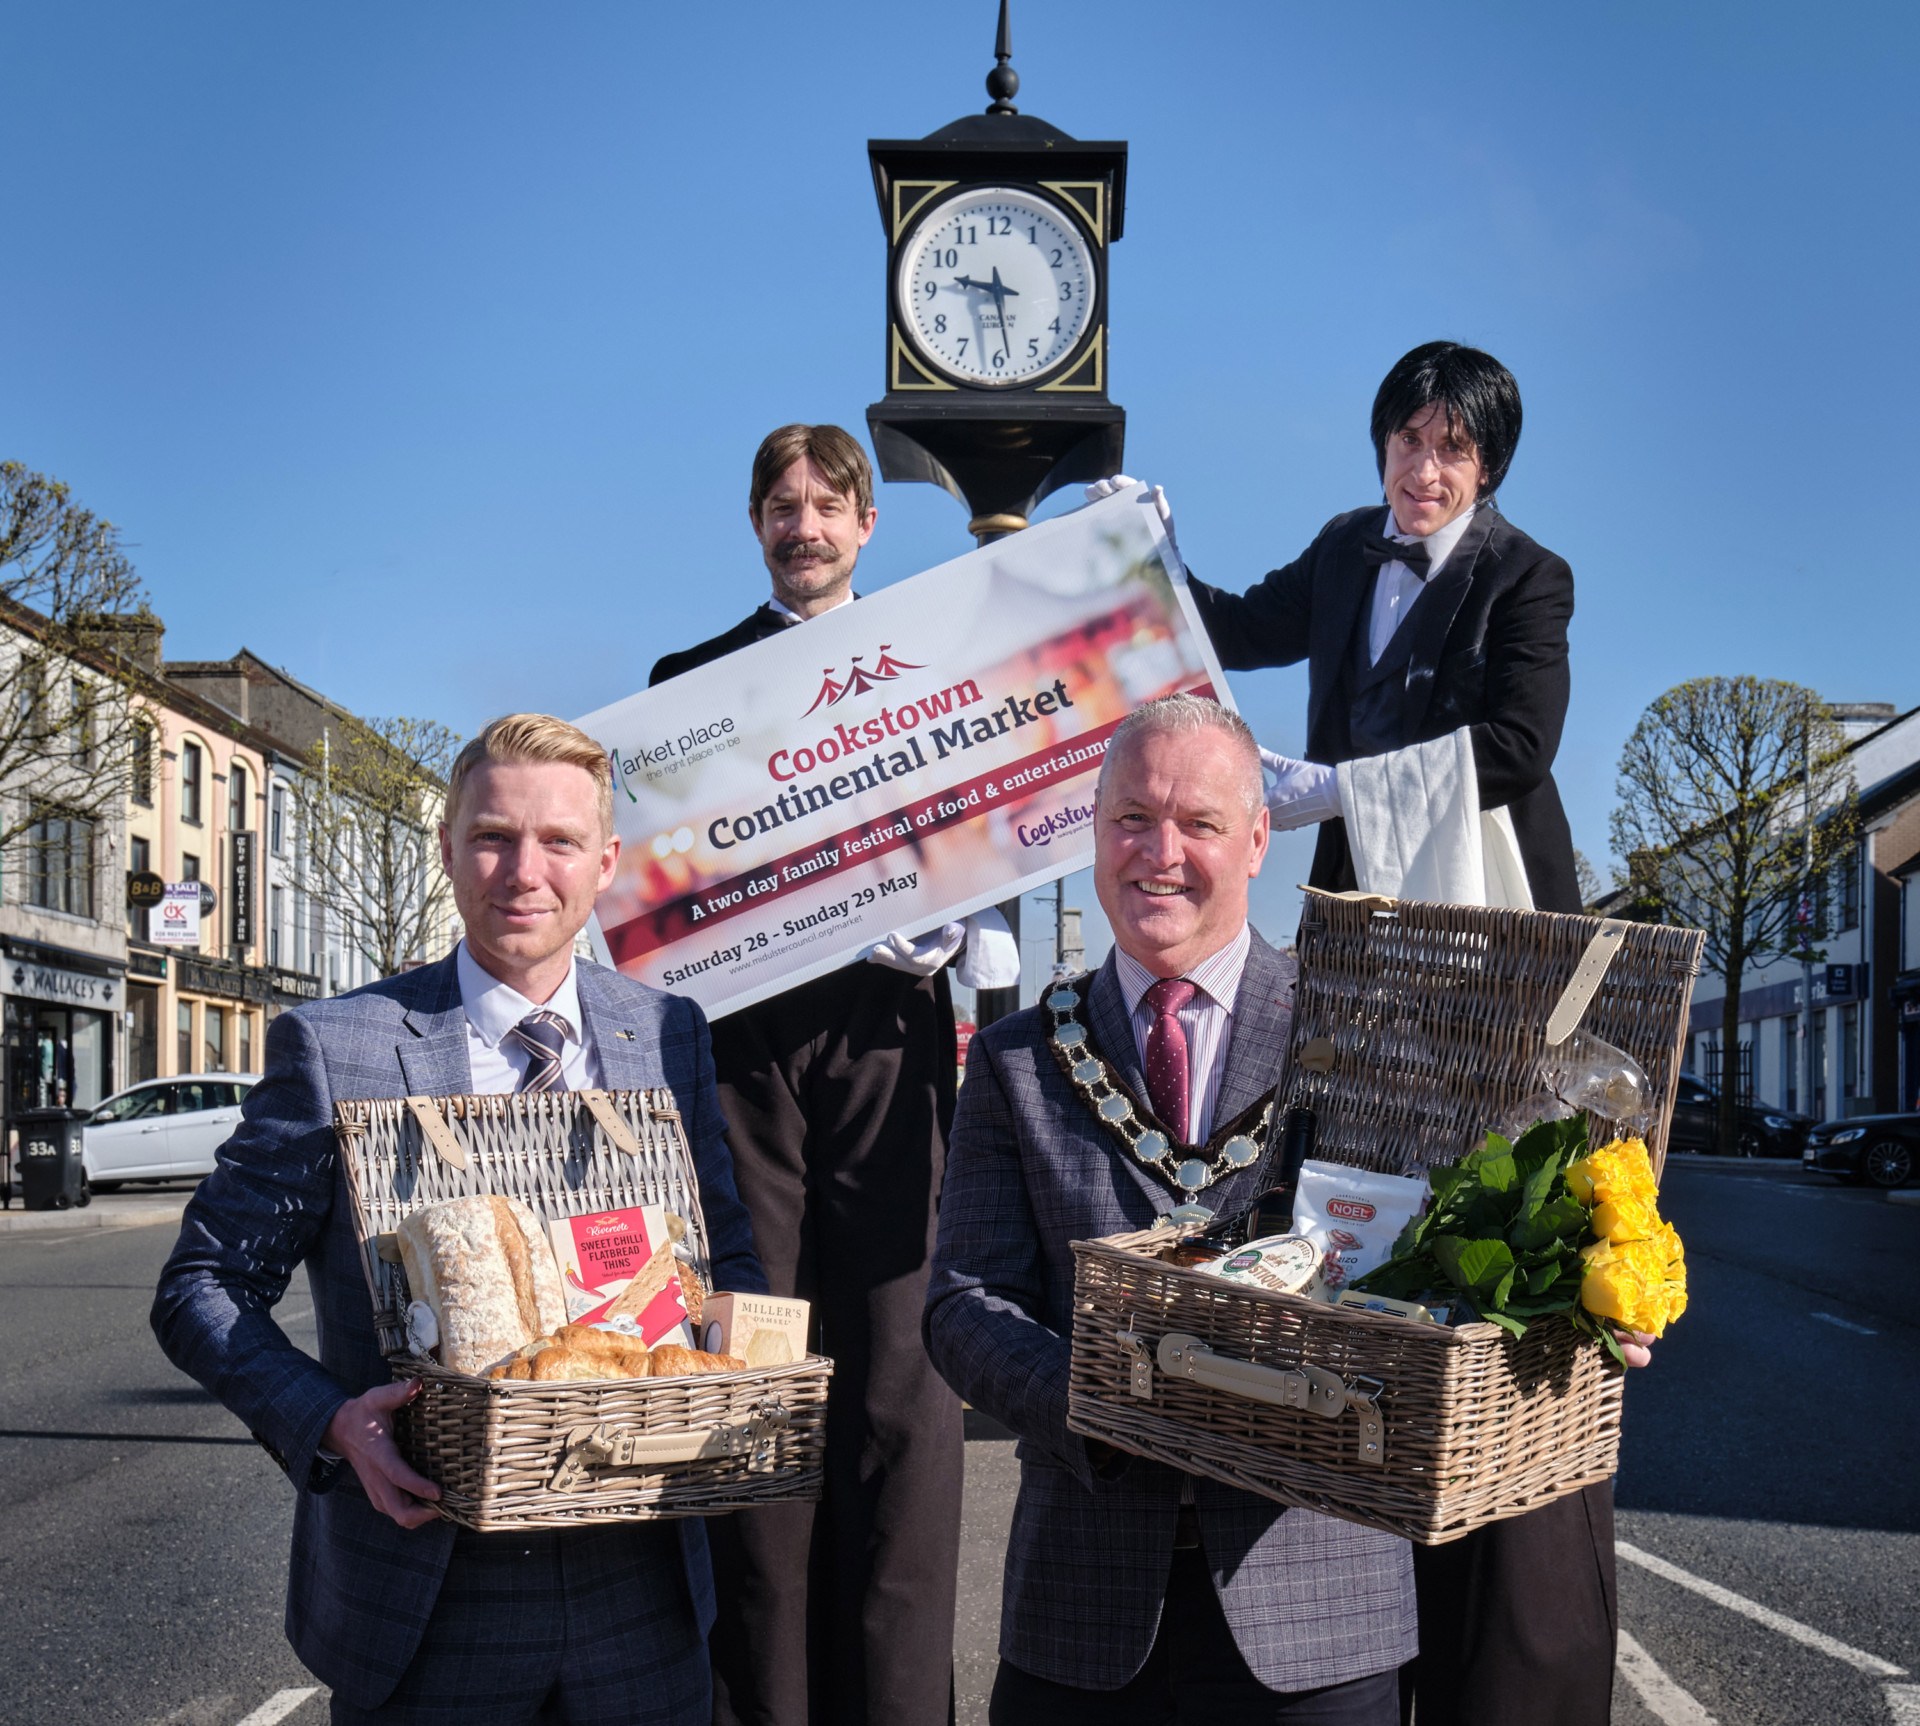 Continental Market returns to Cookstown